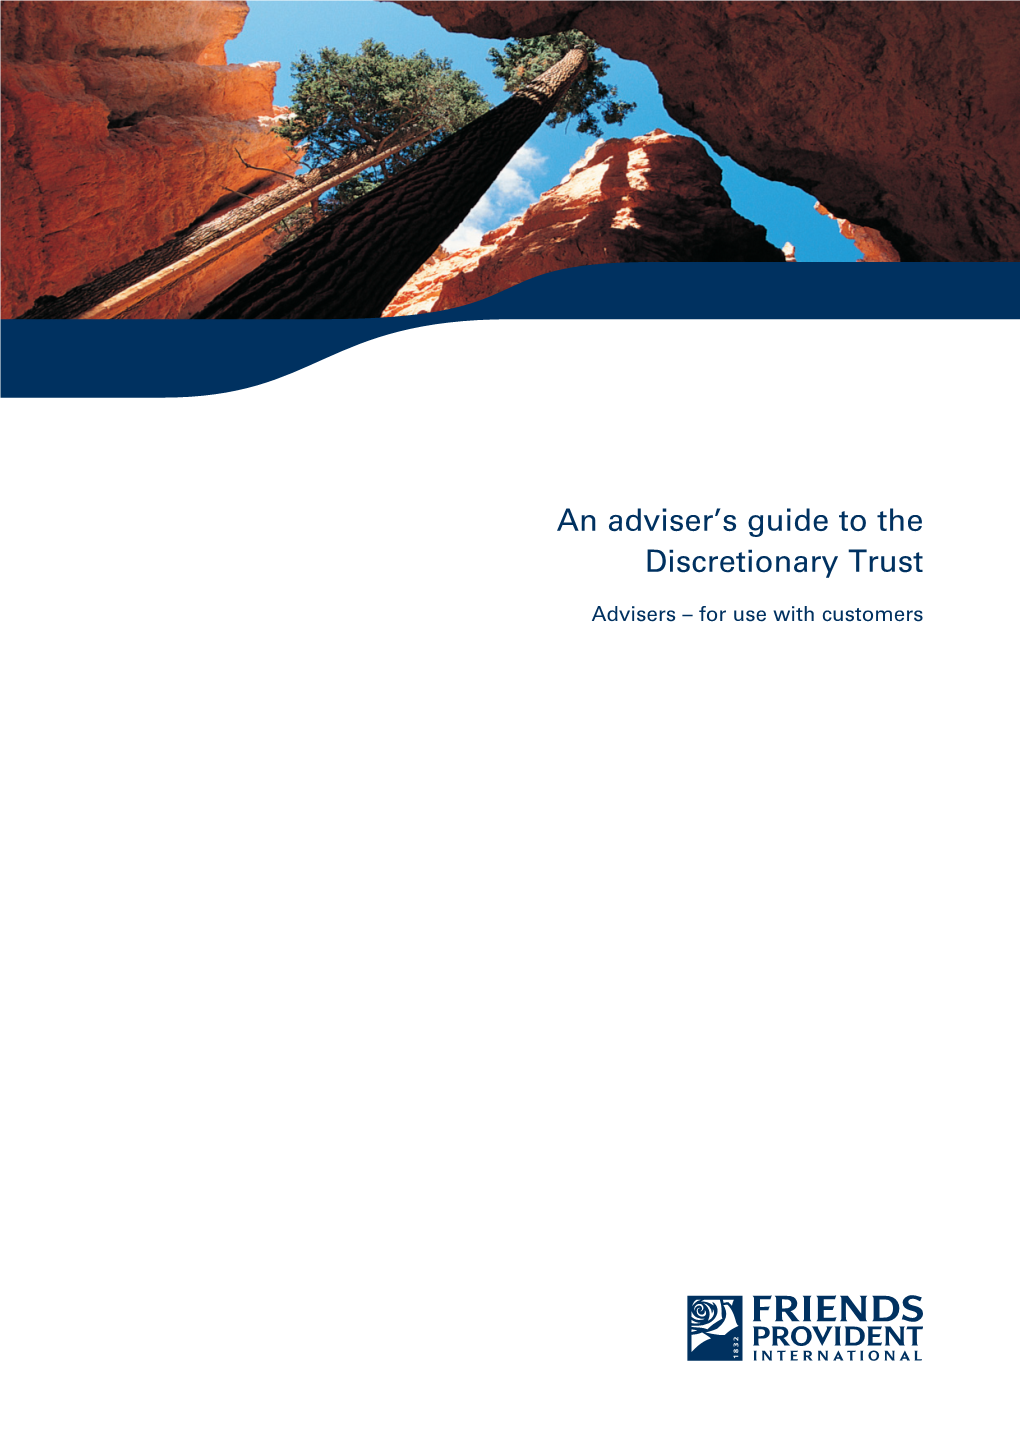 An Adviser's Guide to the Discretionary Trust